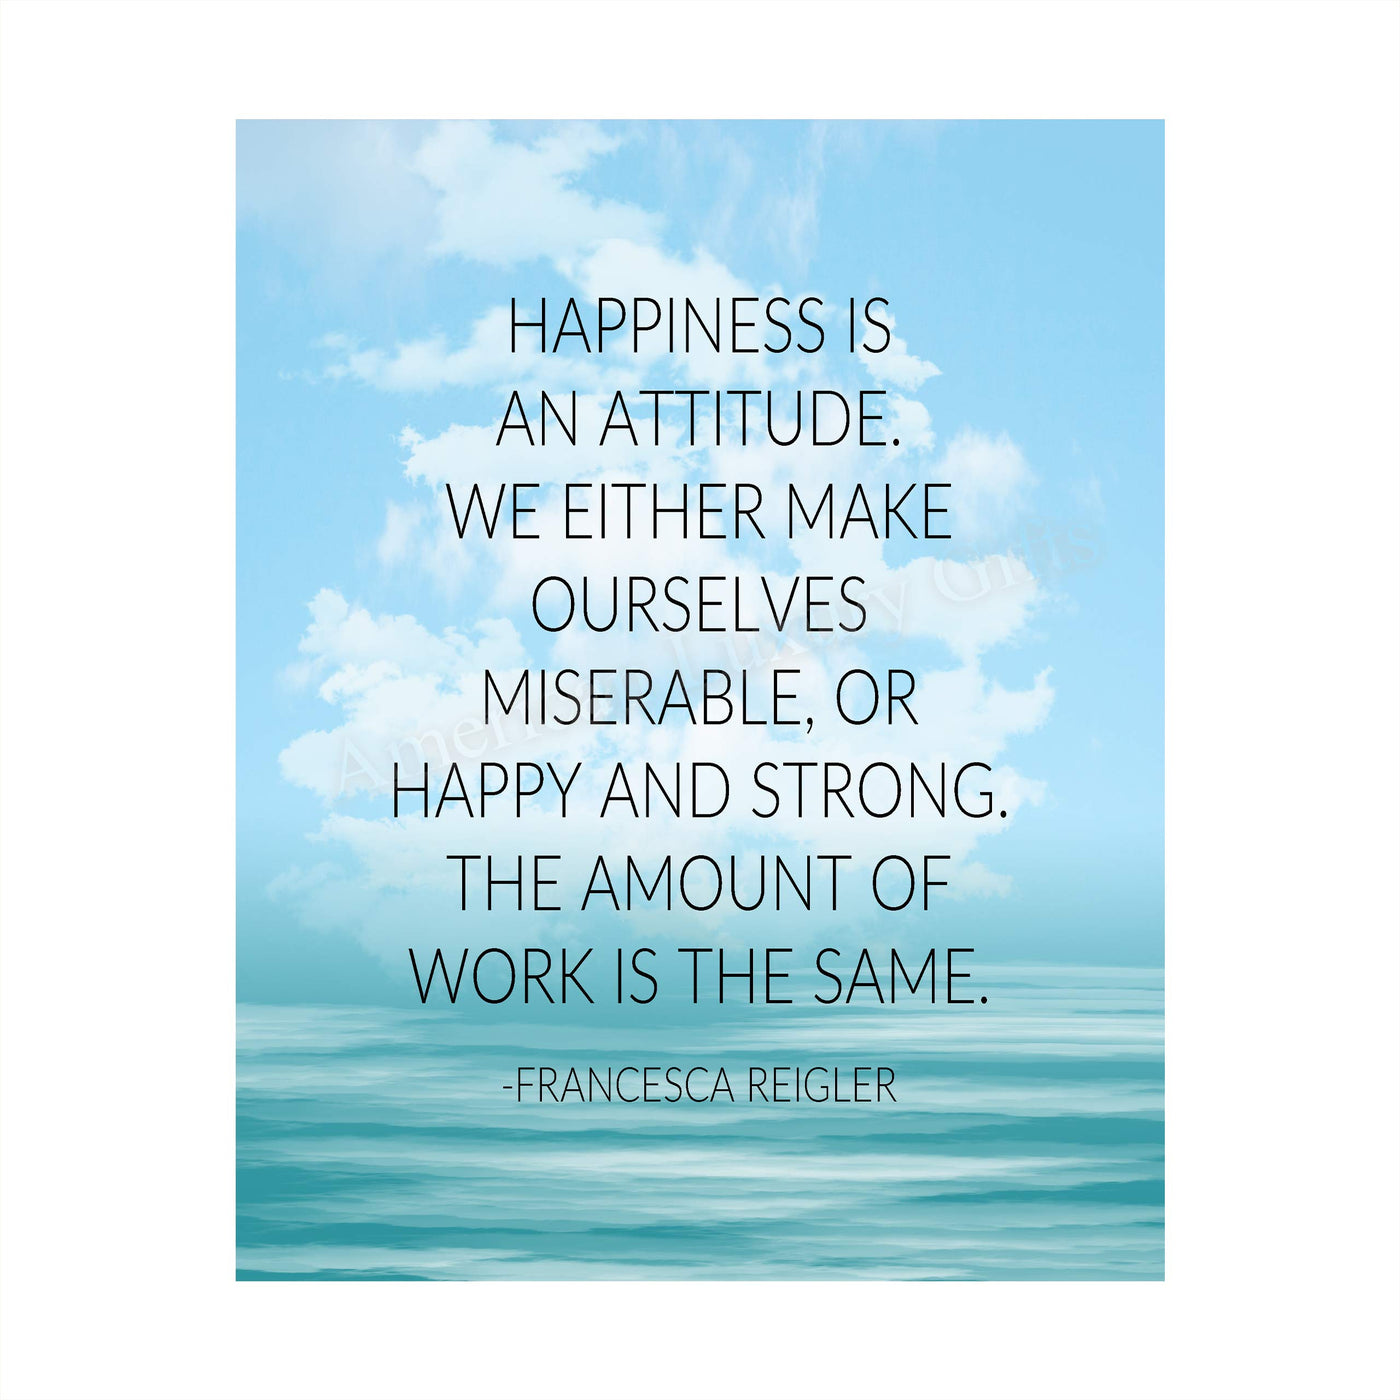 Happiness Is An Attitude-Inspirational Quotes Wall Art-8 x 10" Modern Typographic Print-Ready to Frame. Positive Quote by Francesca Reigler. Home-Office-School-Dorm Decor. Great Gift & Life Lesson!